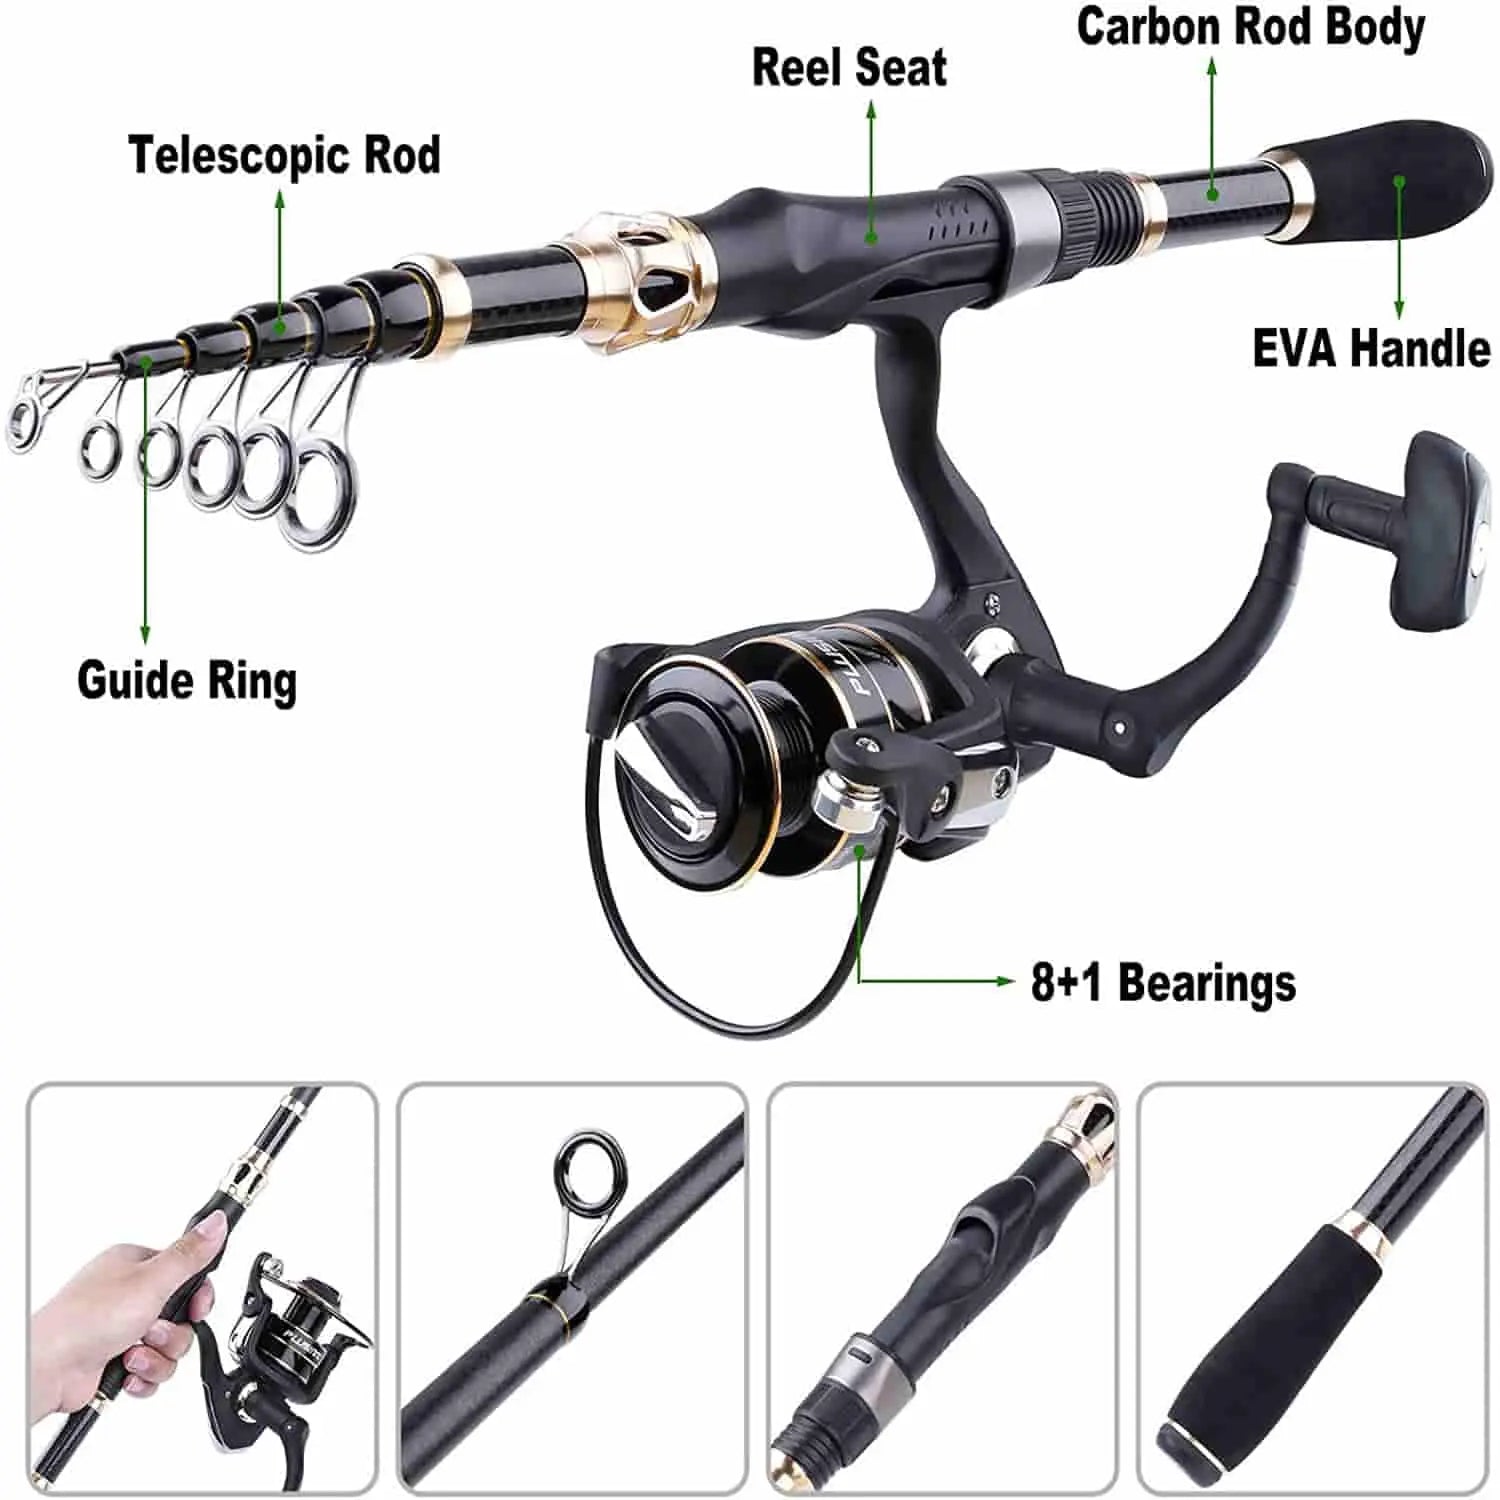 PLUSINNO Eagle Hunting Ⅵ Telescopic Fishing Rods and Reel Combos with Carrier Bag